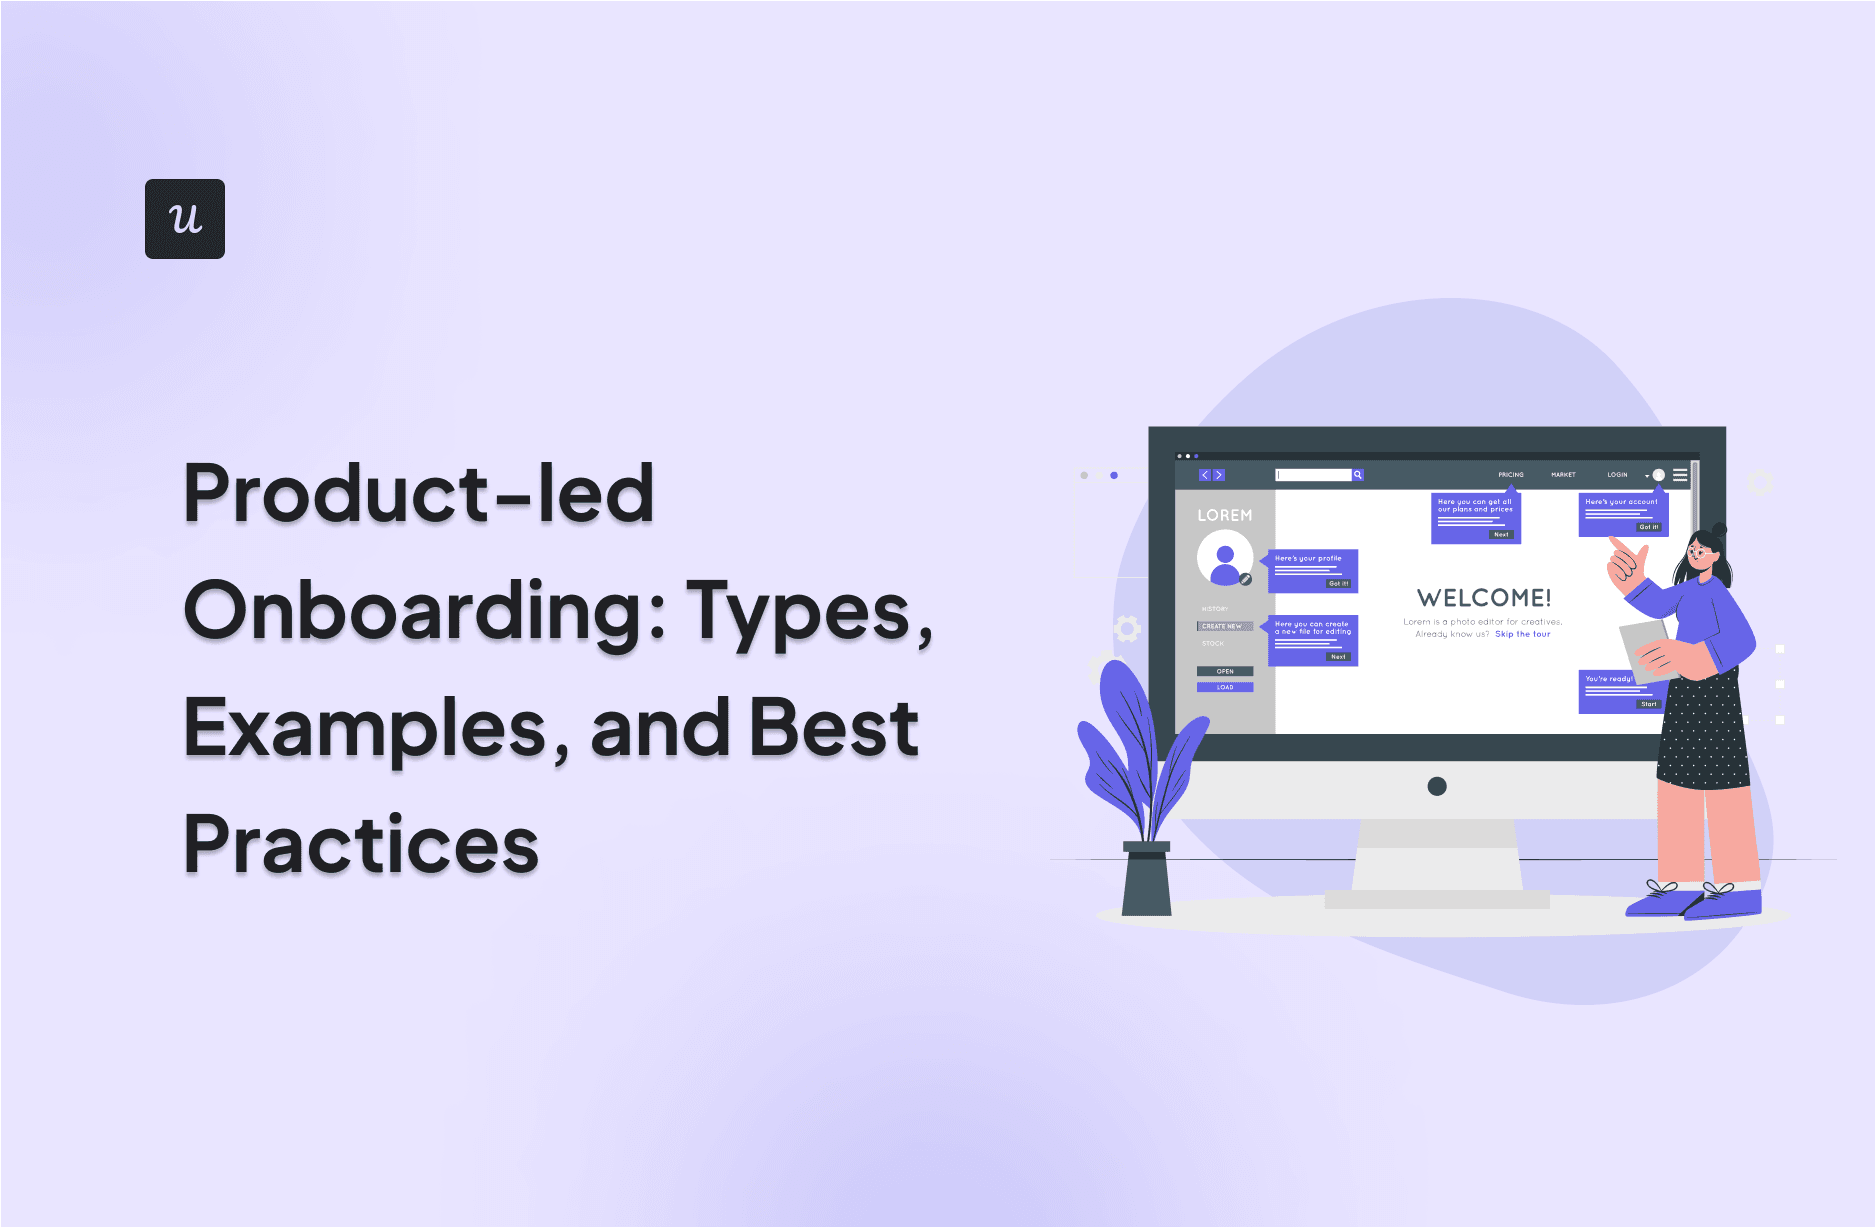 Product-led Onboarding: Types, Examples, and Best Practices cover